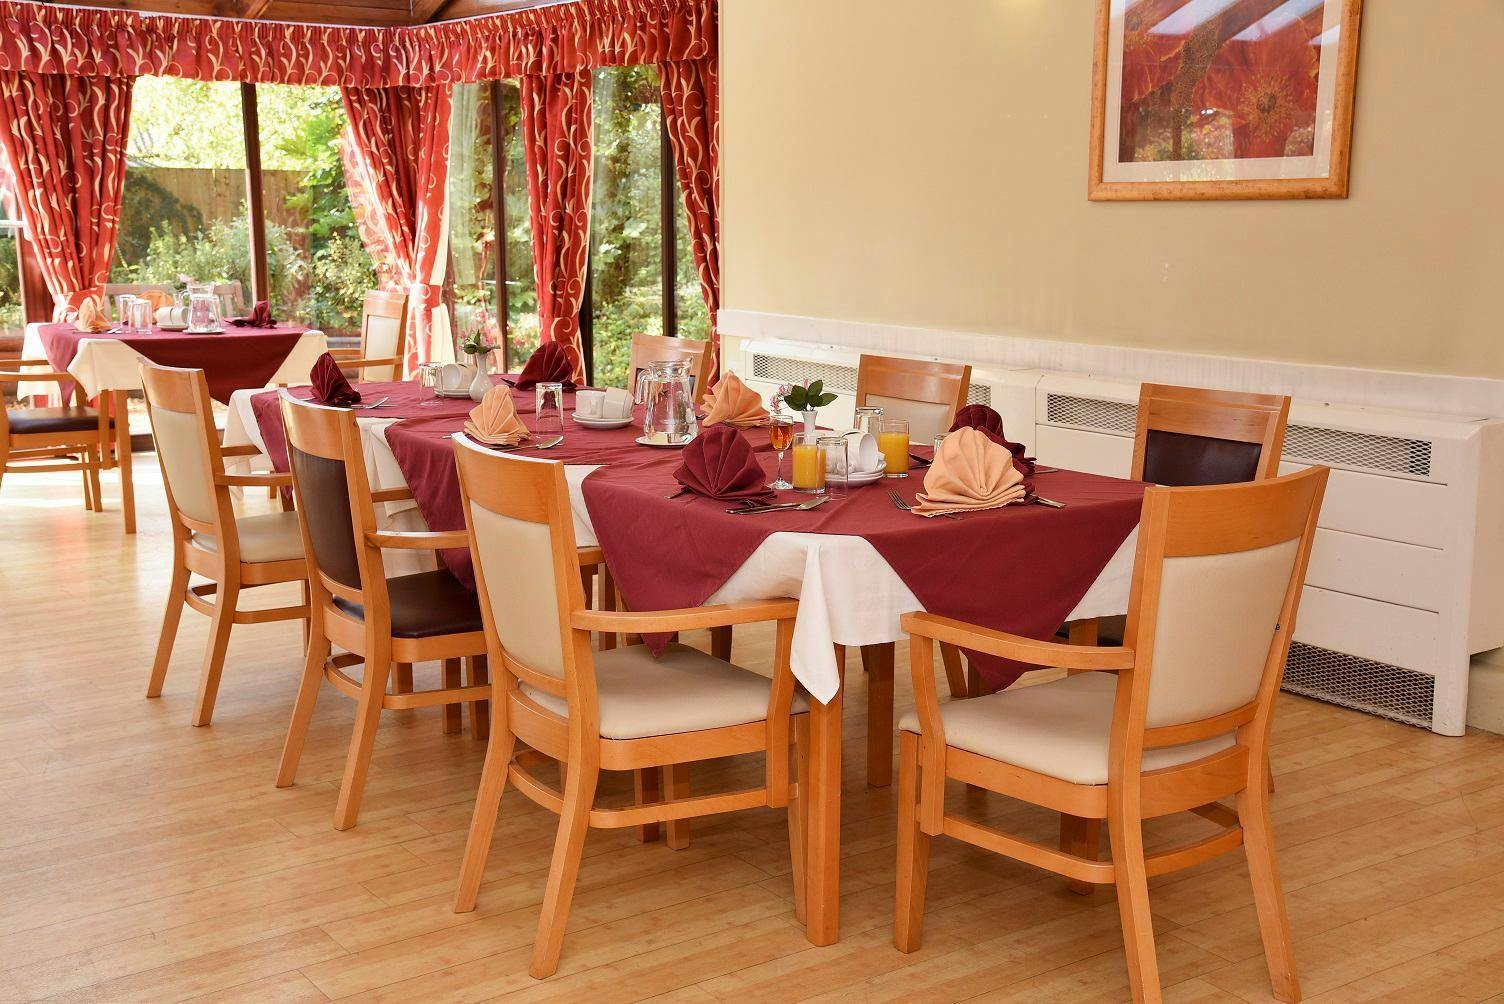 Dining area of Ashby Court care home in Ashby-de-la-zouch, Leicestershire